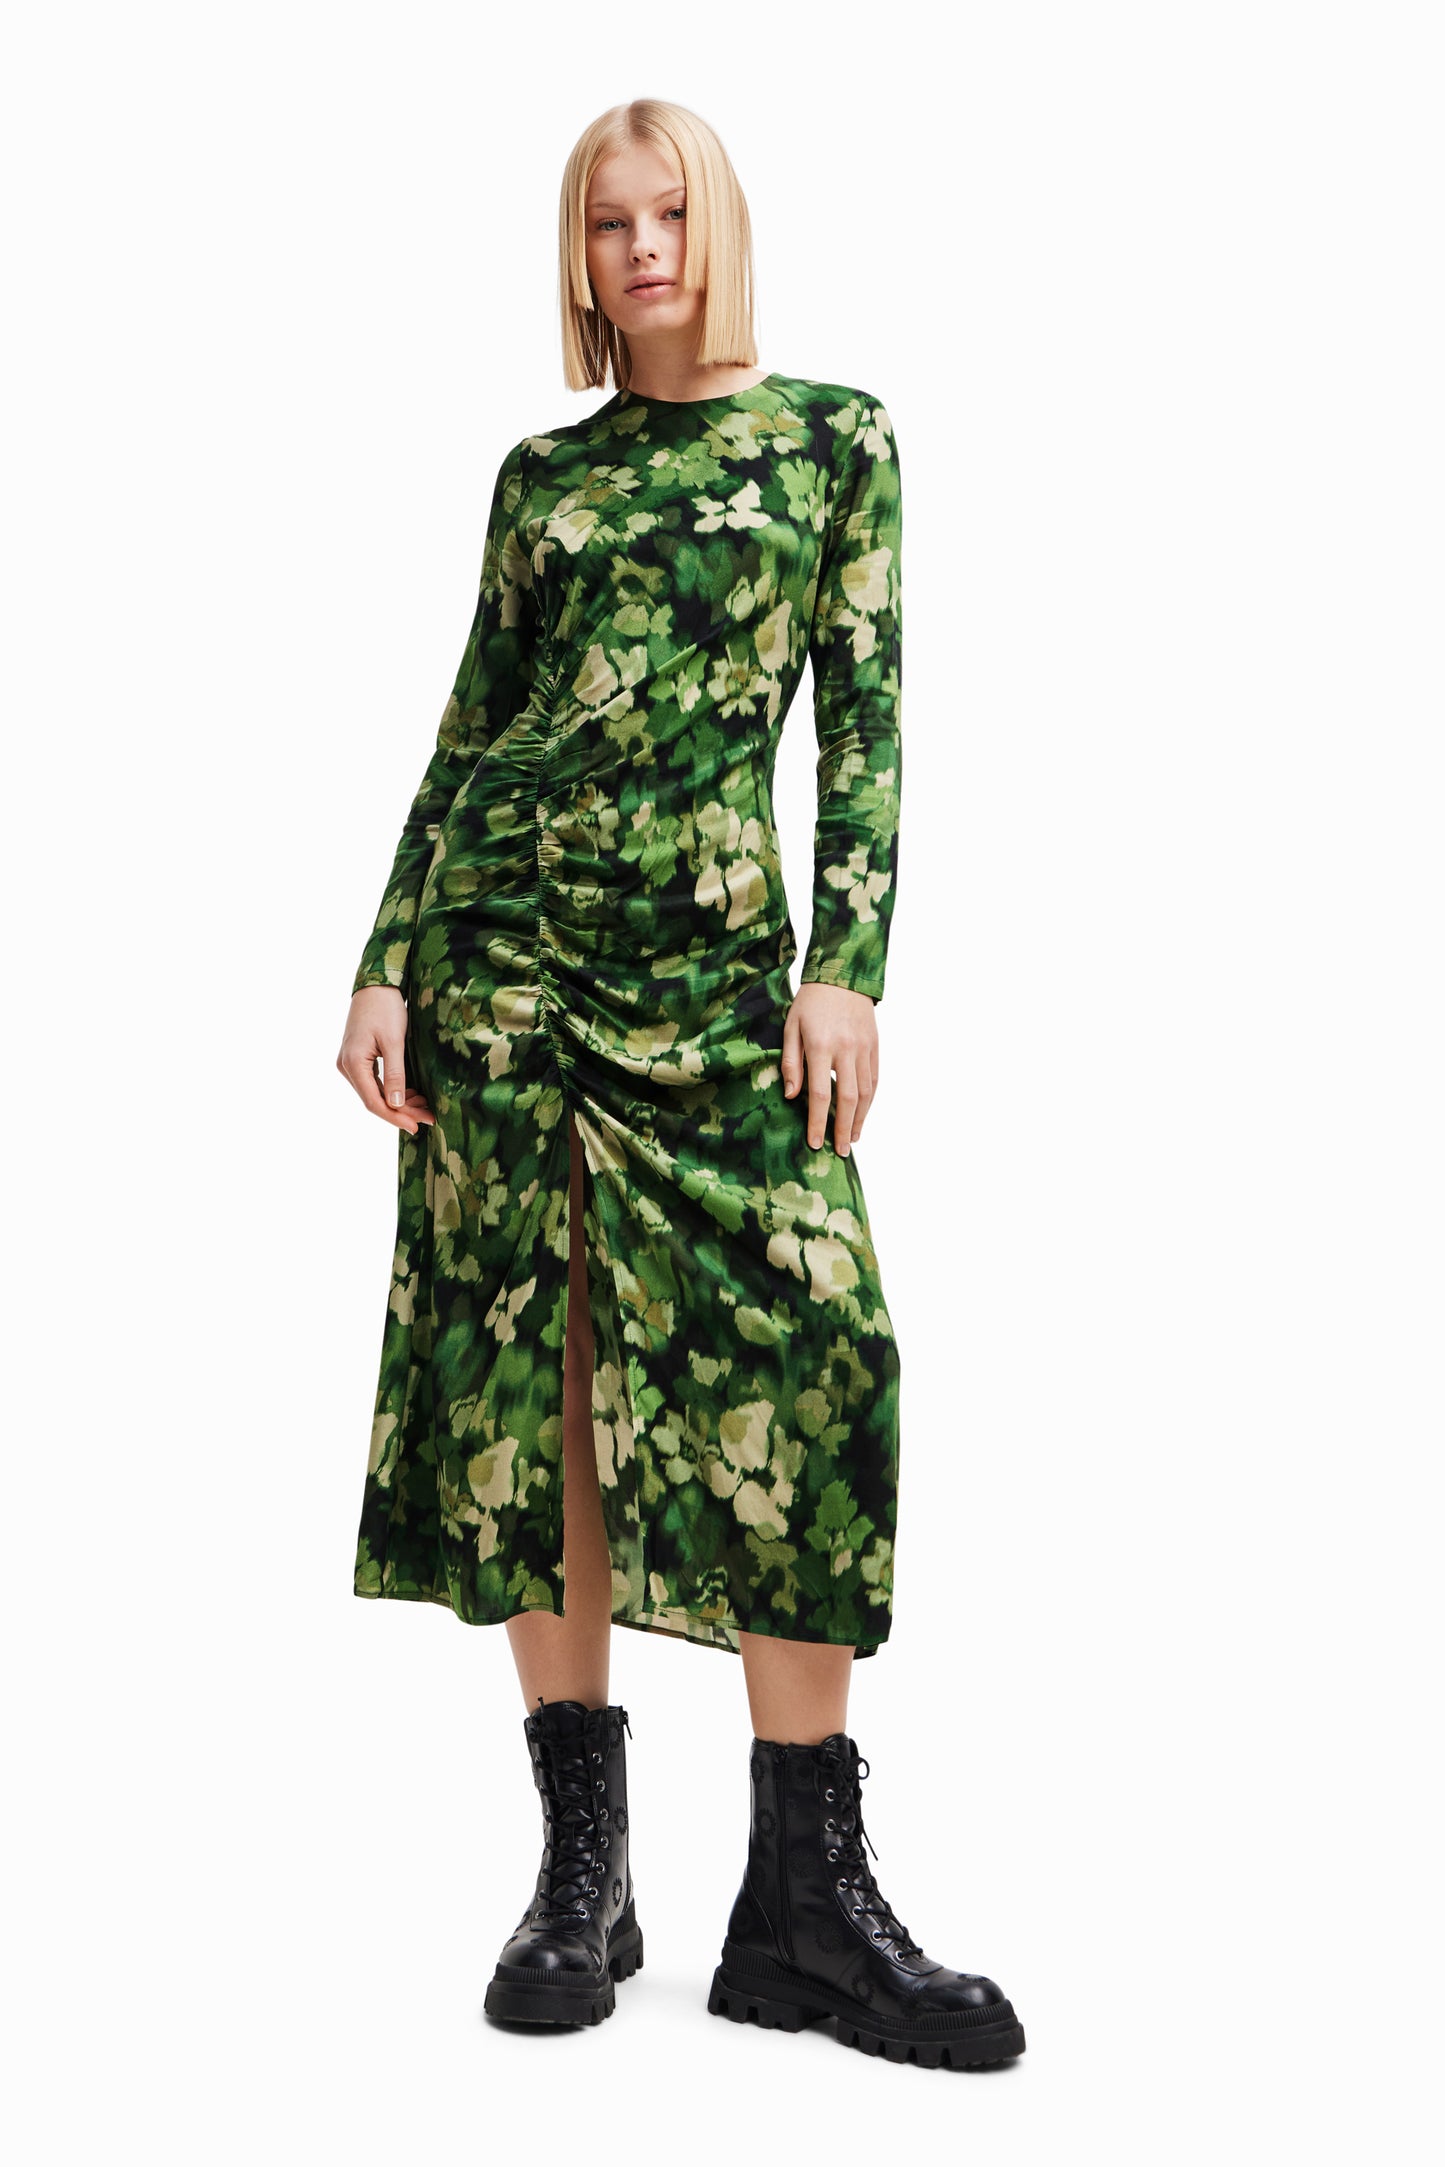 Desigual Gathered Midi Dress - Above The Crowd Boutique